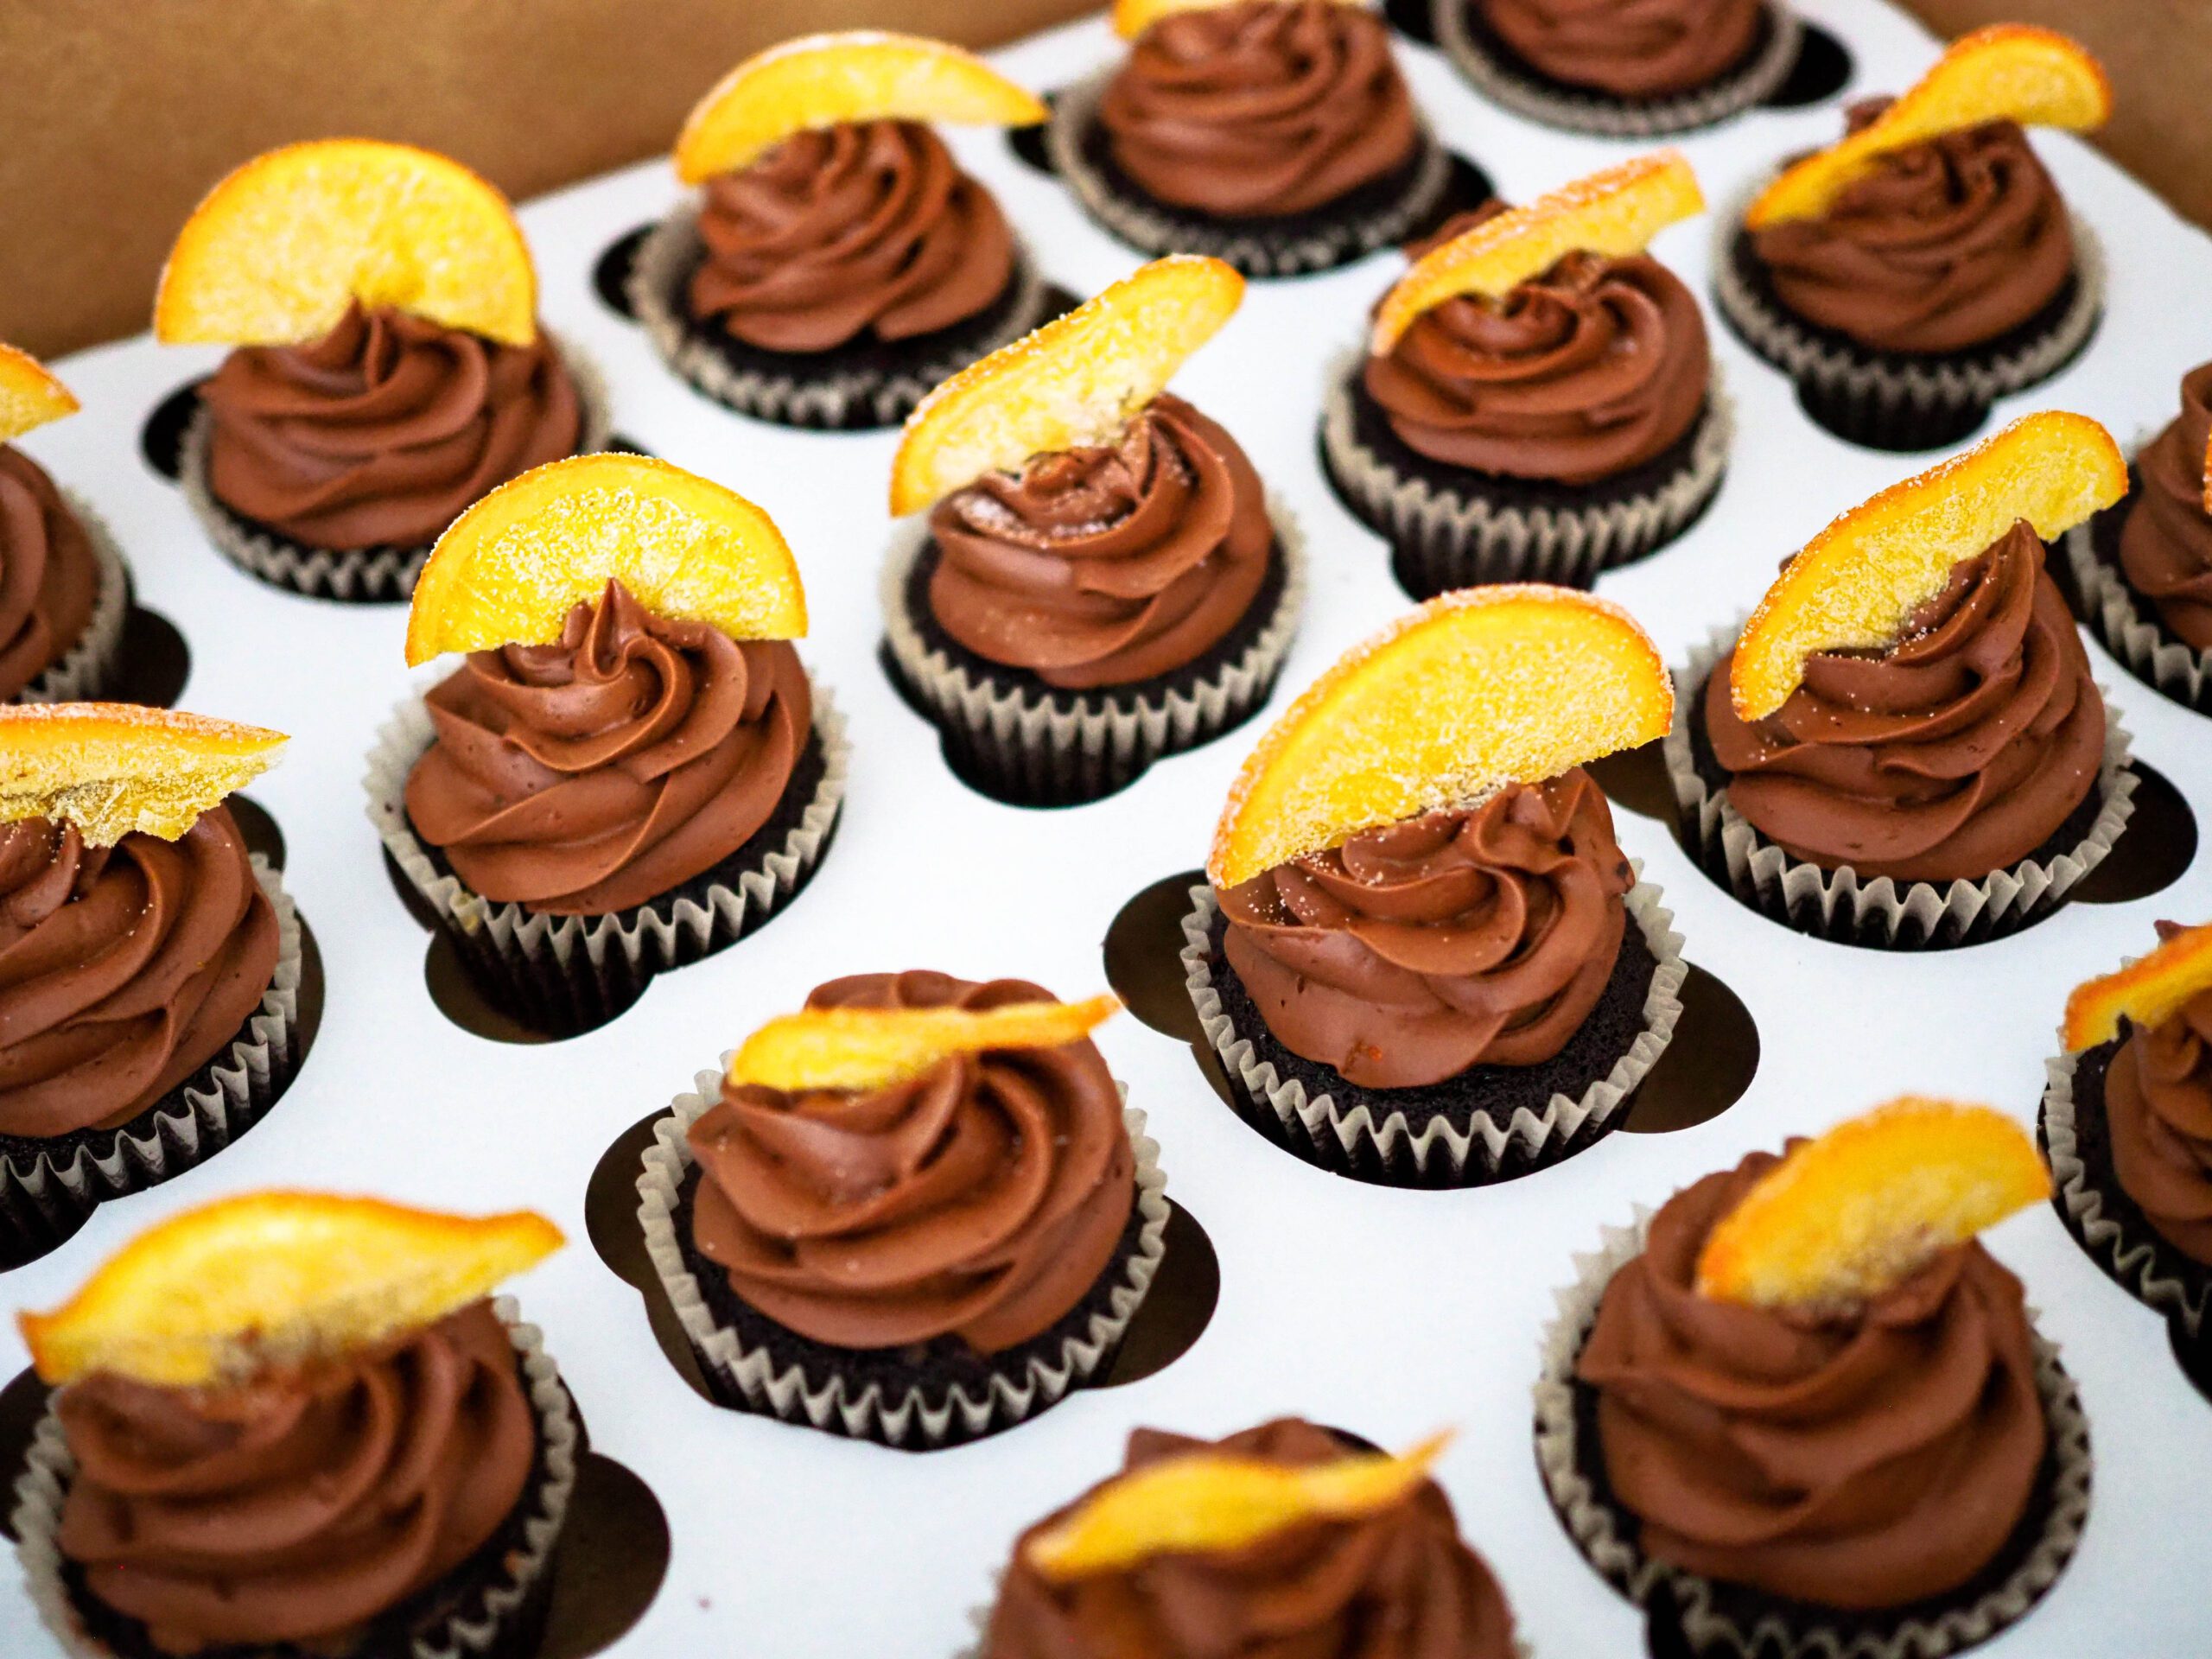 Chocolate orange cupcakes, with a candied orange on top of a swirl of chocolate orange French buttercream.